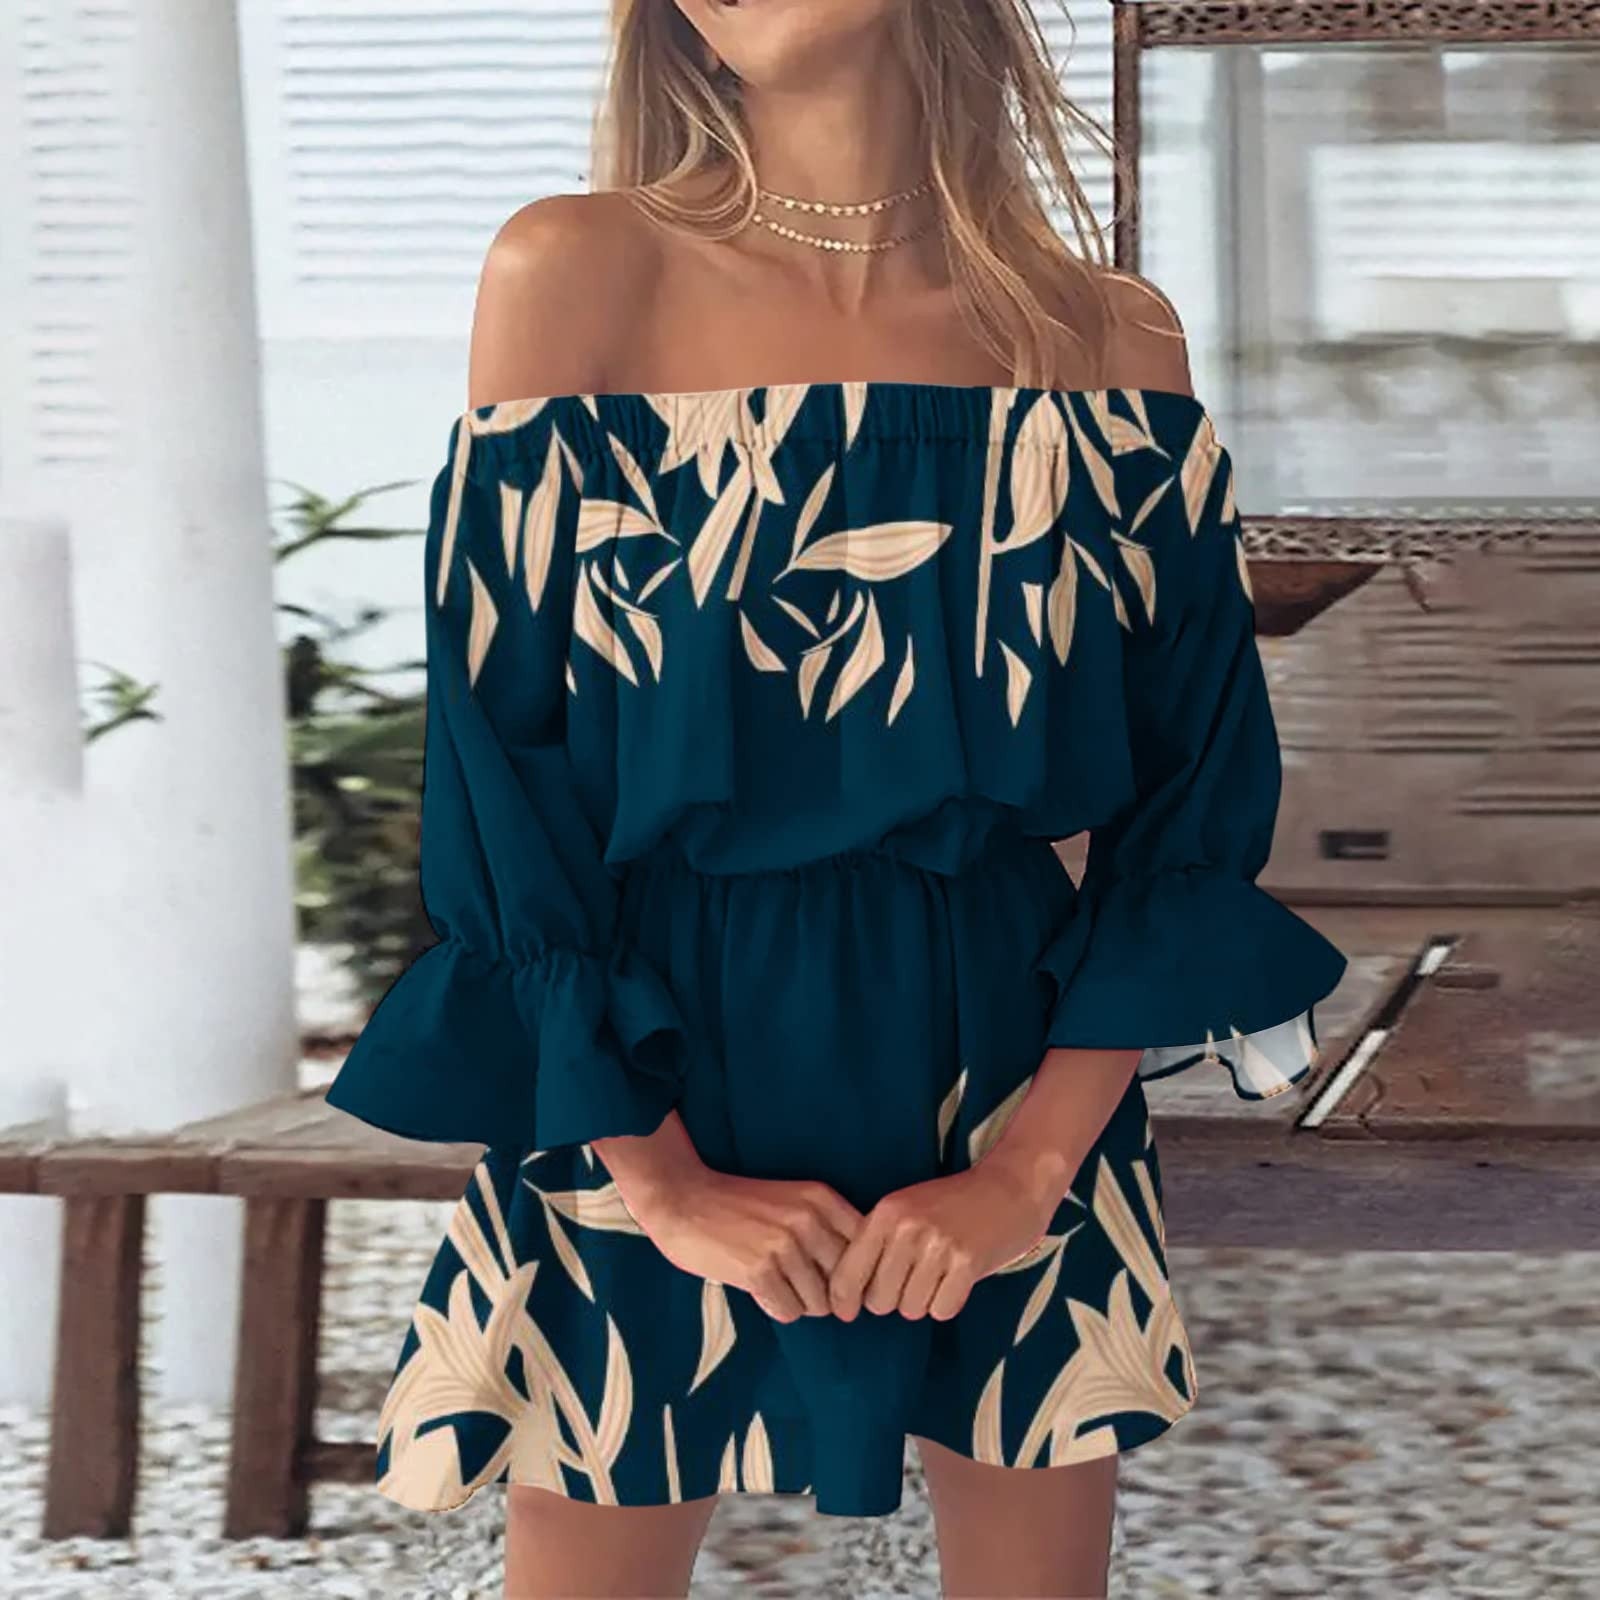 Step into Summer 2023 with Boho Chic Vibes in Our Off-Shoulder Floral Print Flare Sleeve Tunic Dress!